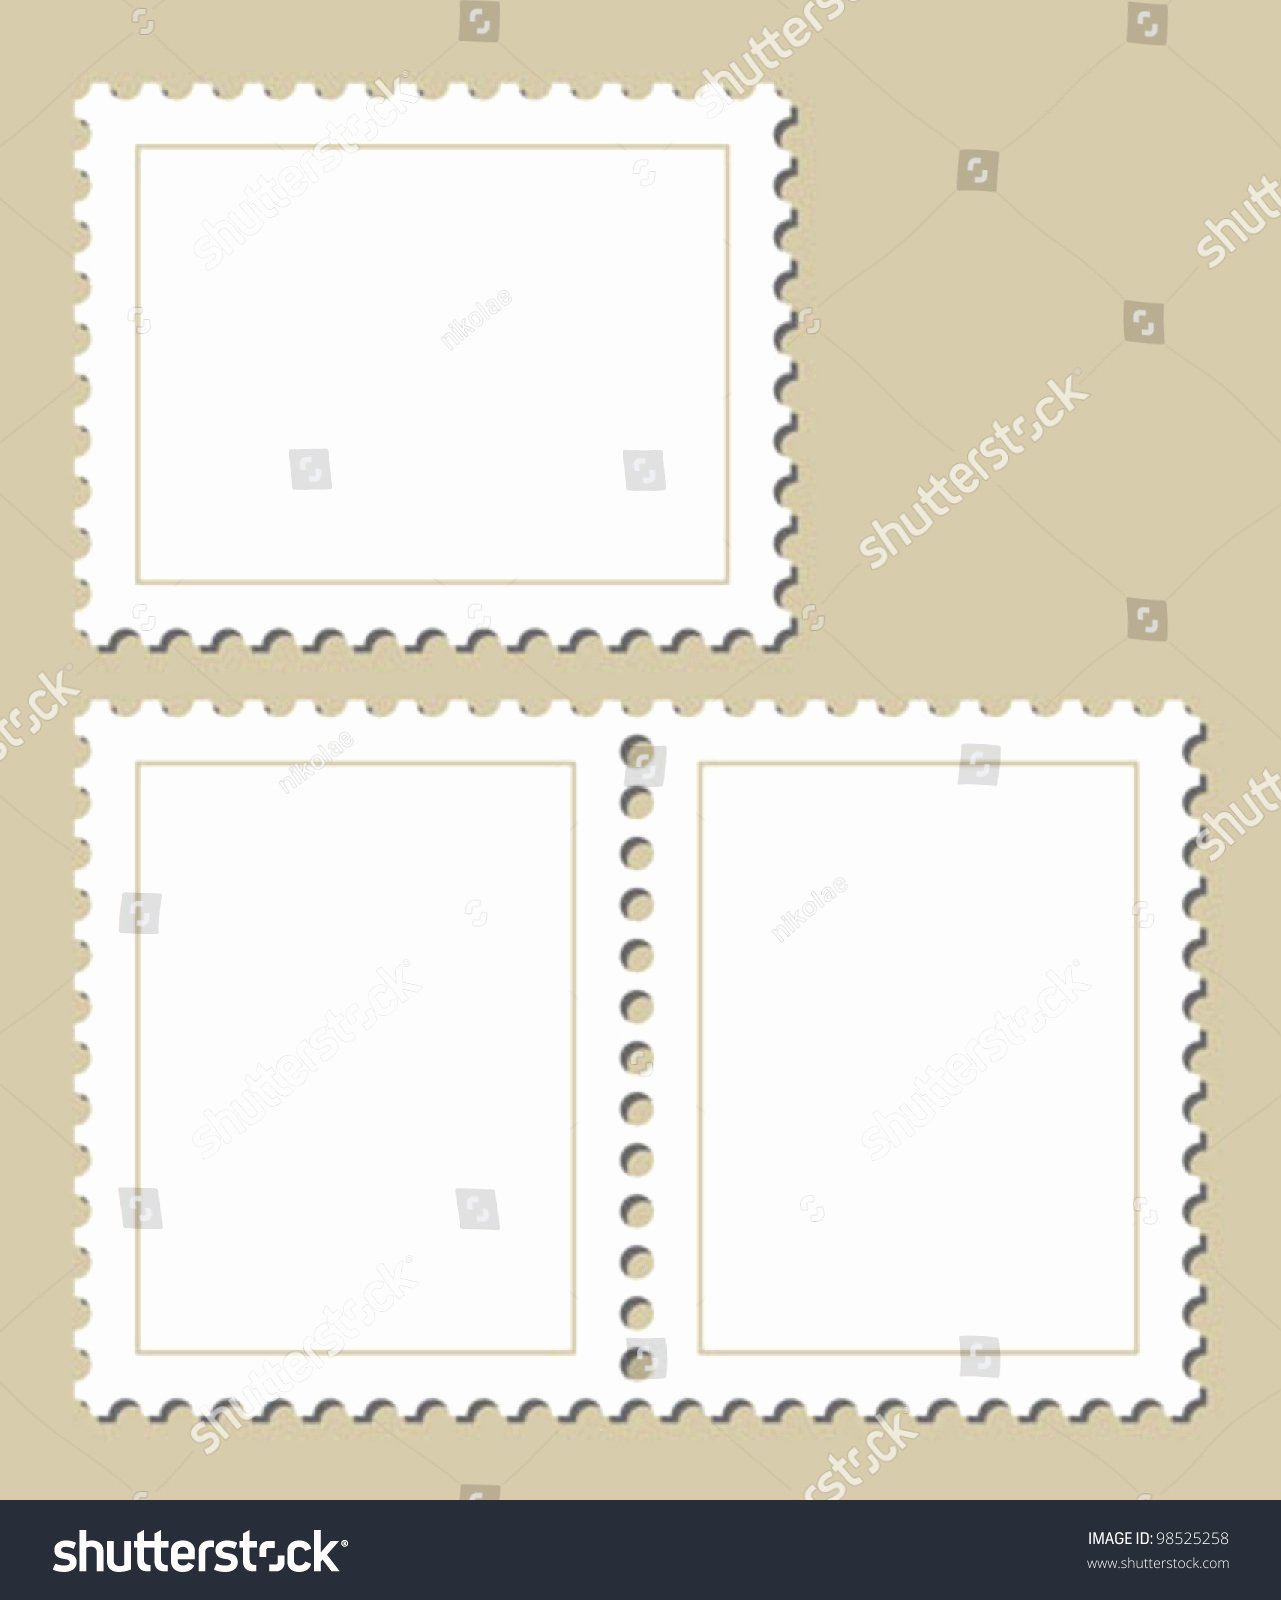 Blank Stamp Template Awesome Blank Stamp Template Stock Vector Illustration